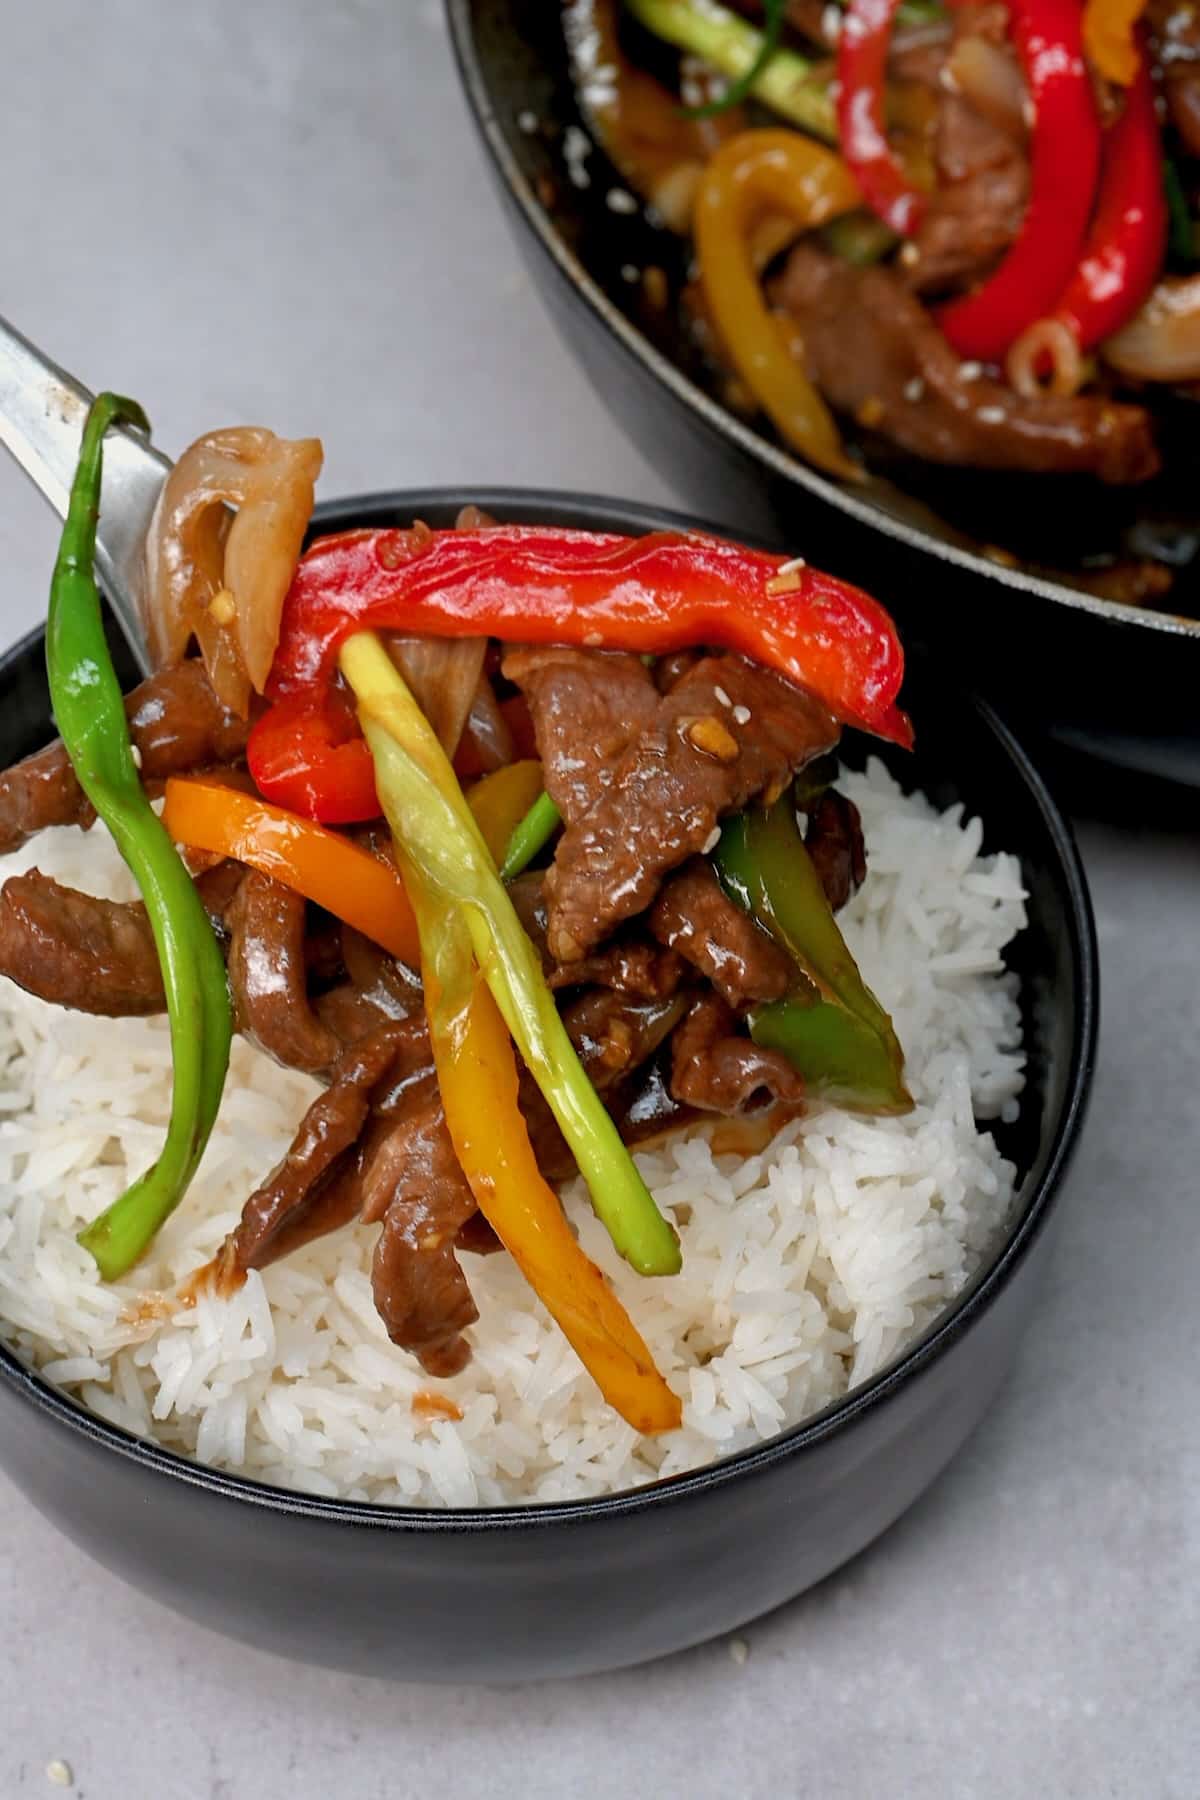 Preparing a serving of rice with beef stir fry